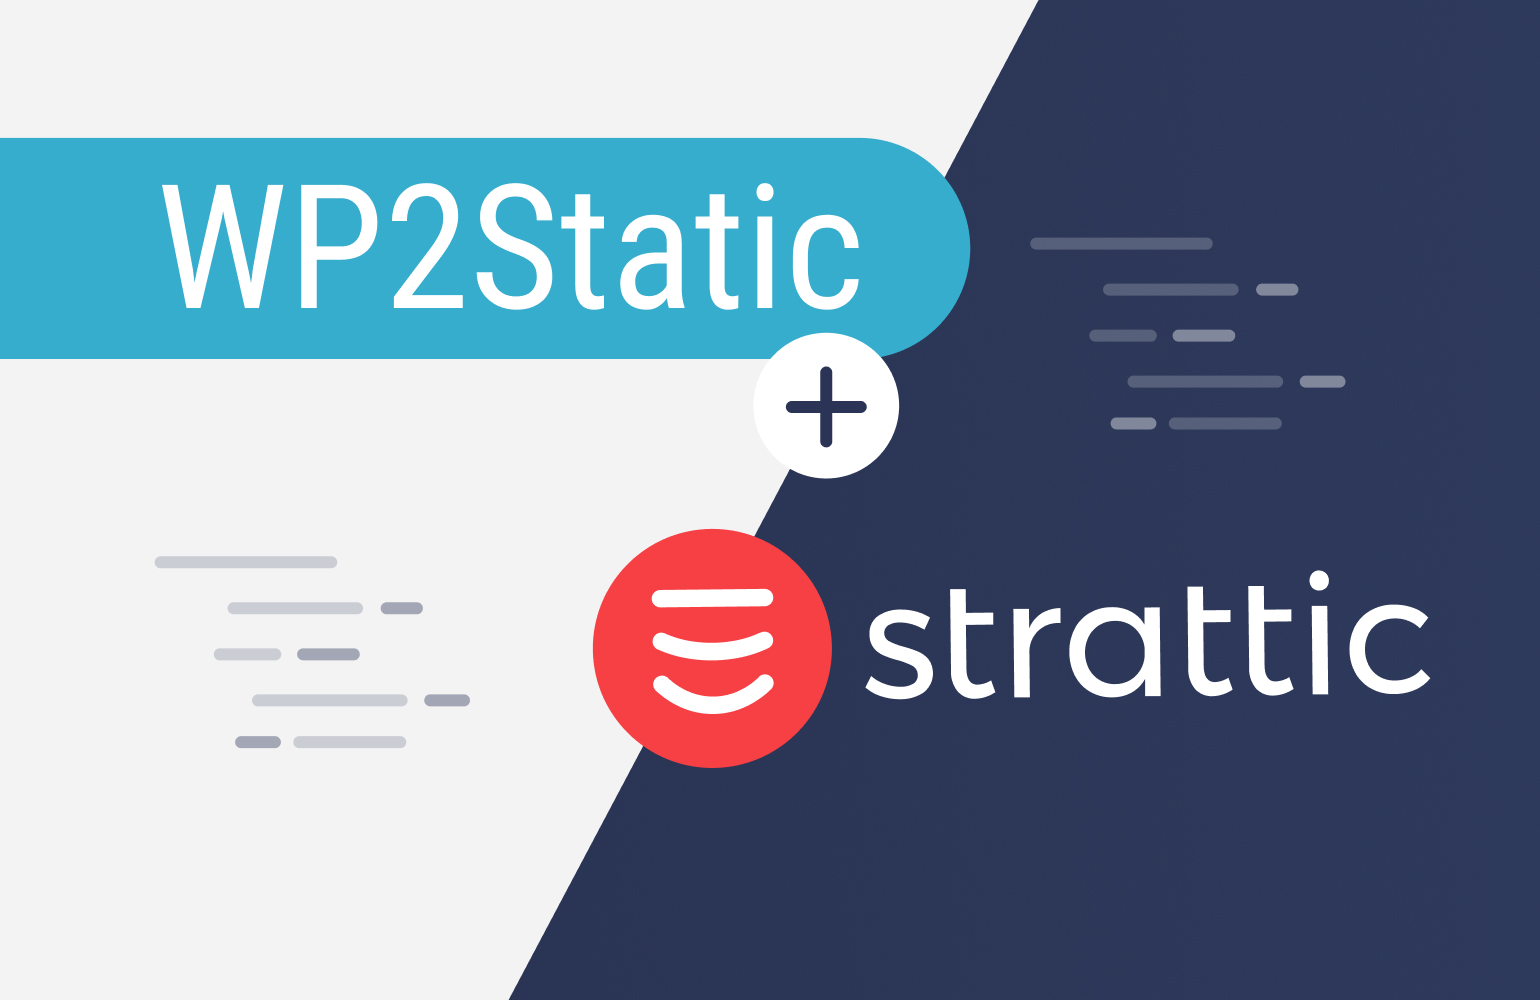 Strattic acquires WP2Static to offer Open Source static WordPress for all